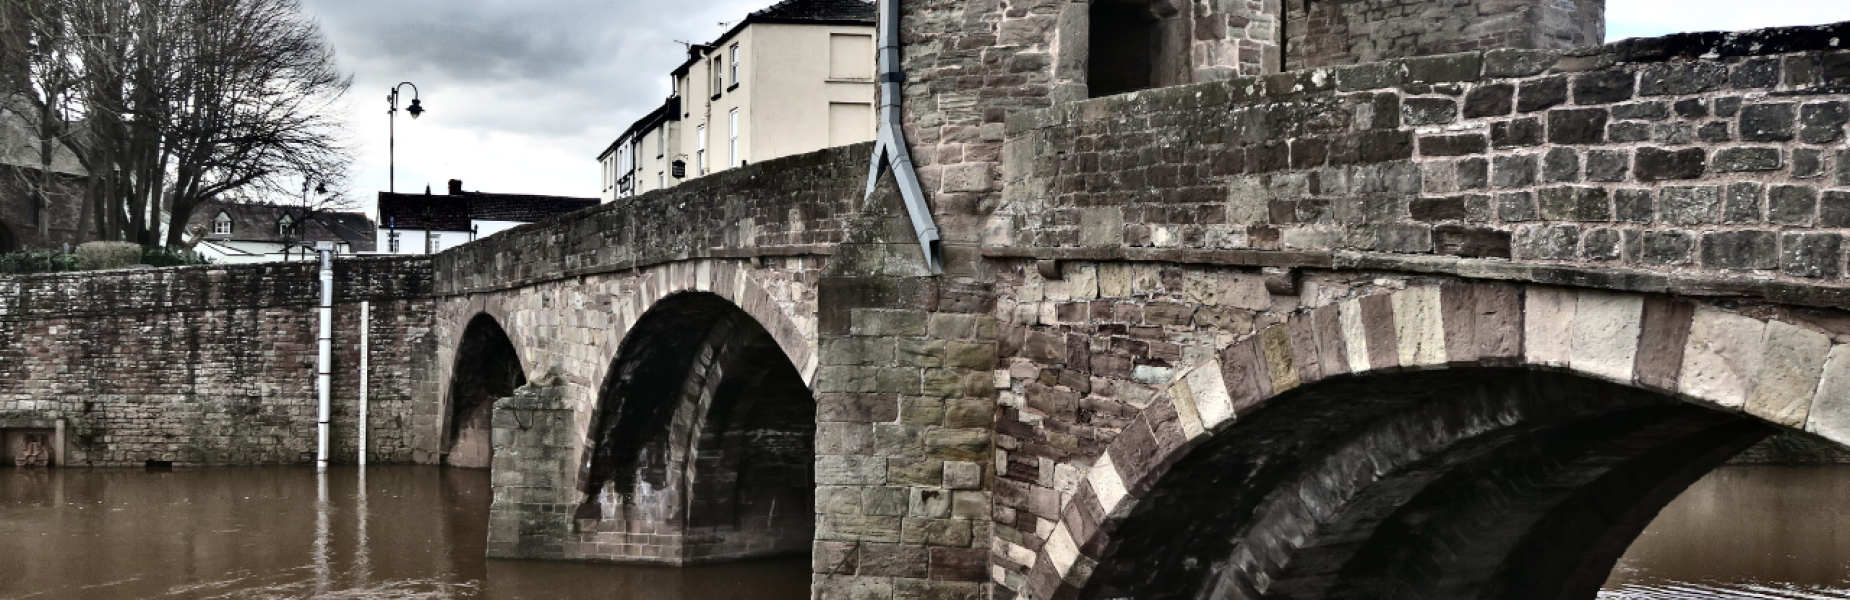 Bridge in Monmouthshire town